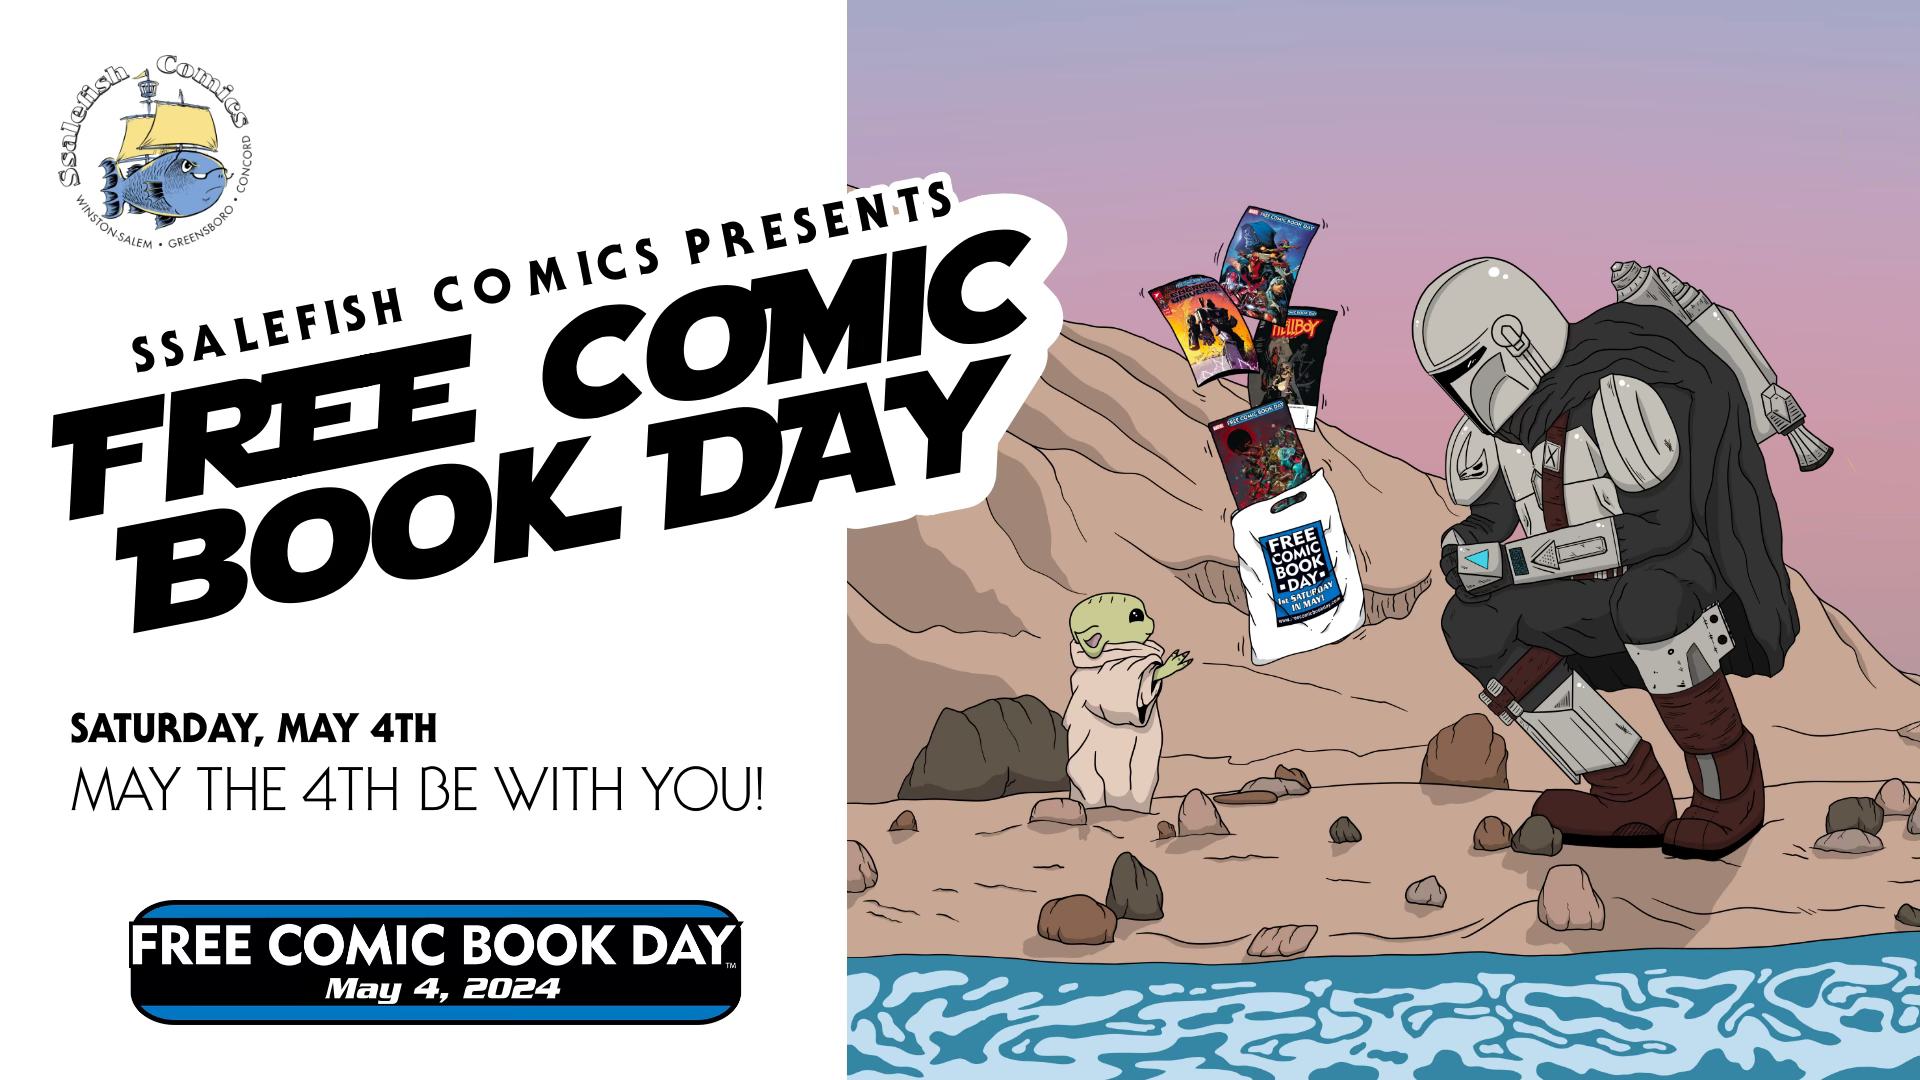 Promotional image for free comic book day on may 4, 2024, featuring a cartoon of a space warrior and an alien on a rocky terrain, holding comic books, with event details included.